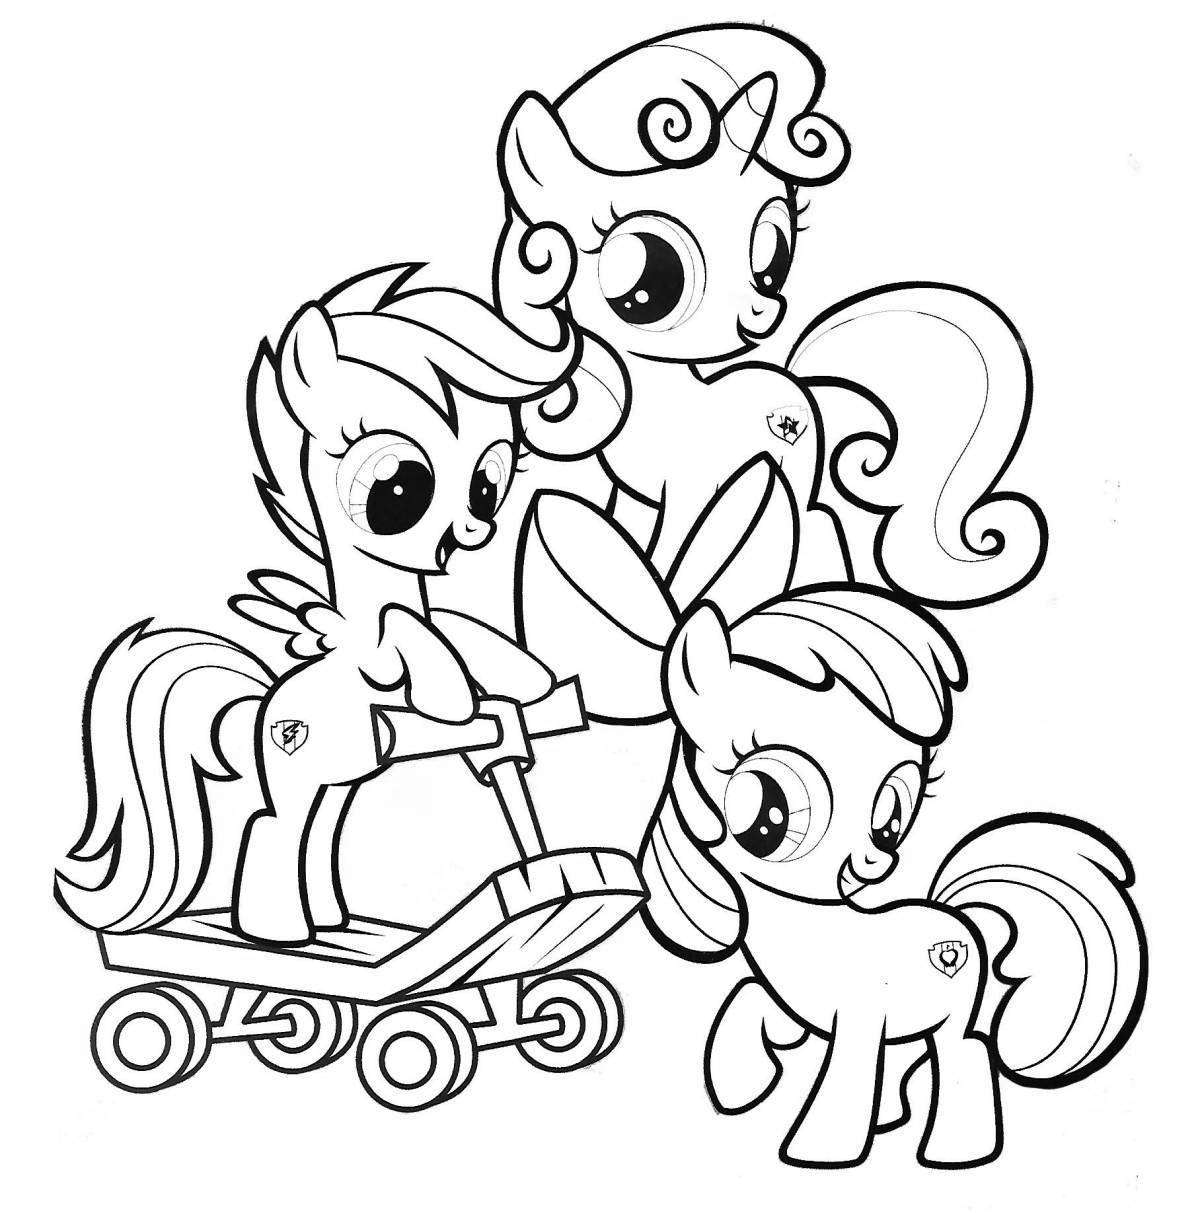 My little pony in good quality #1